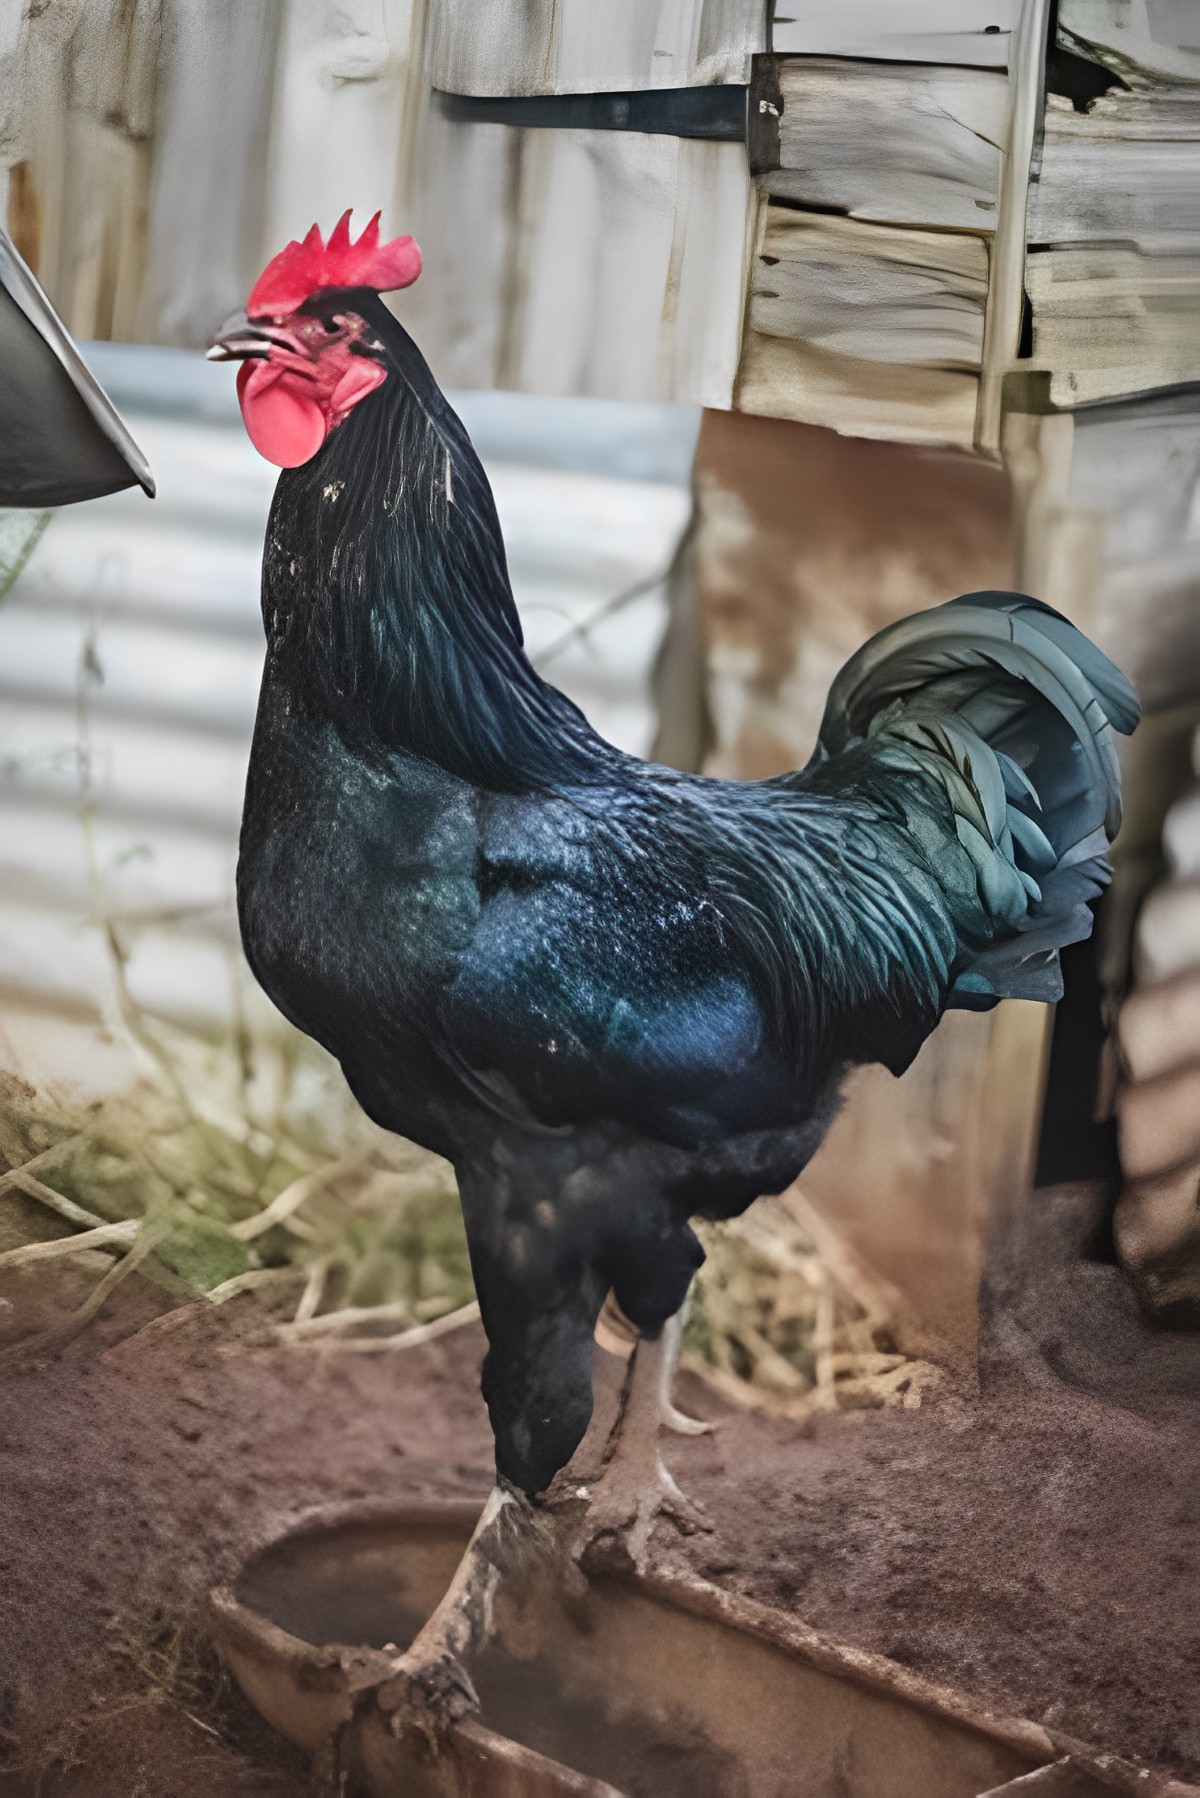 A big, tall, Modern Langshan rooster stands on a feeder in a backyard.